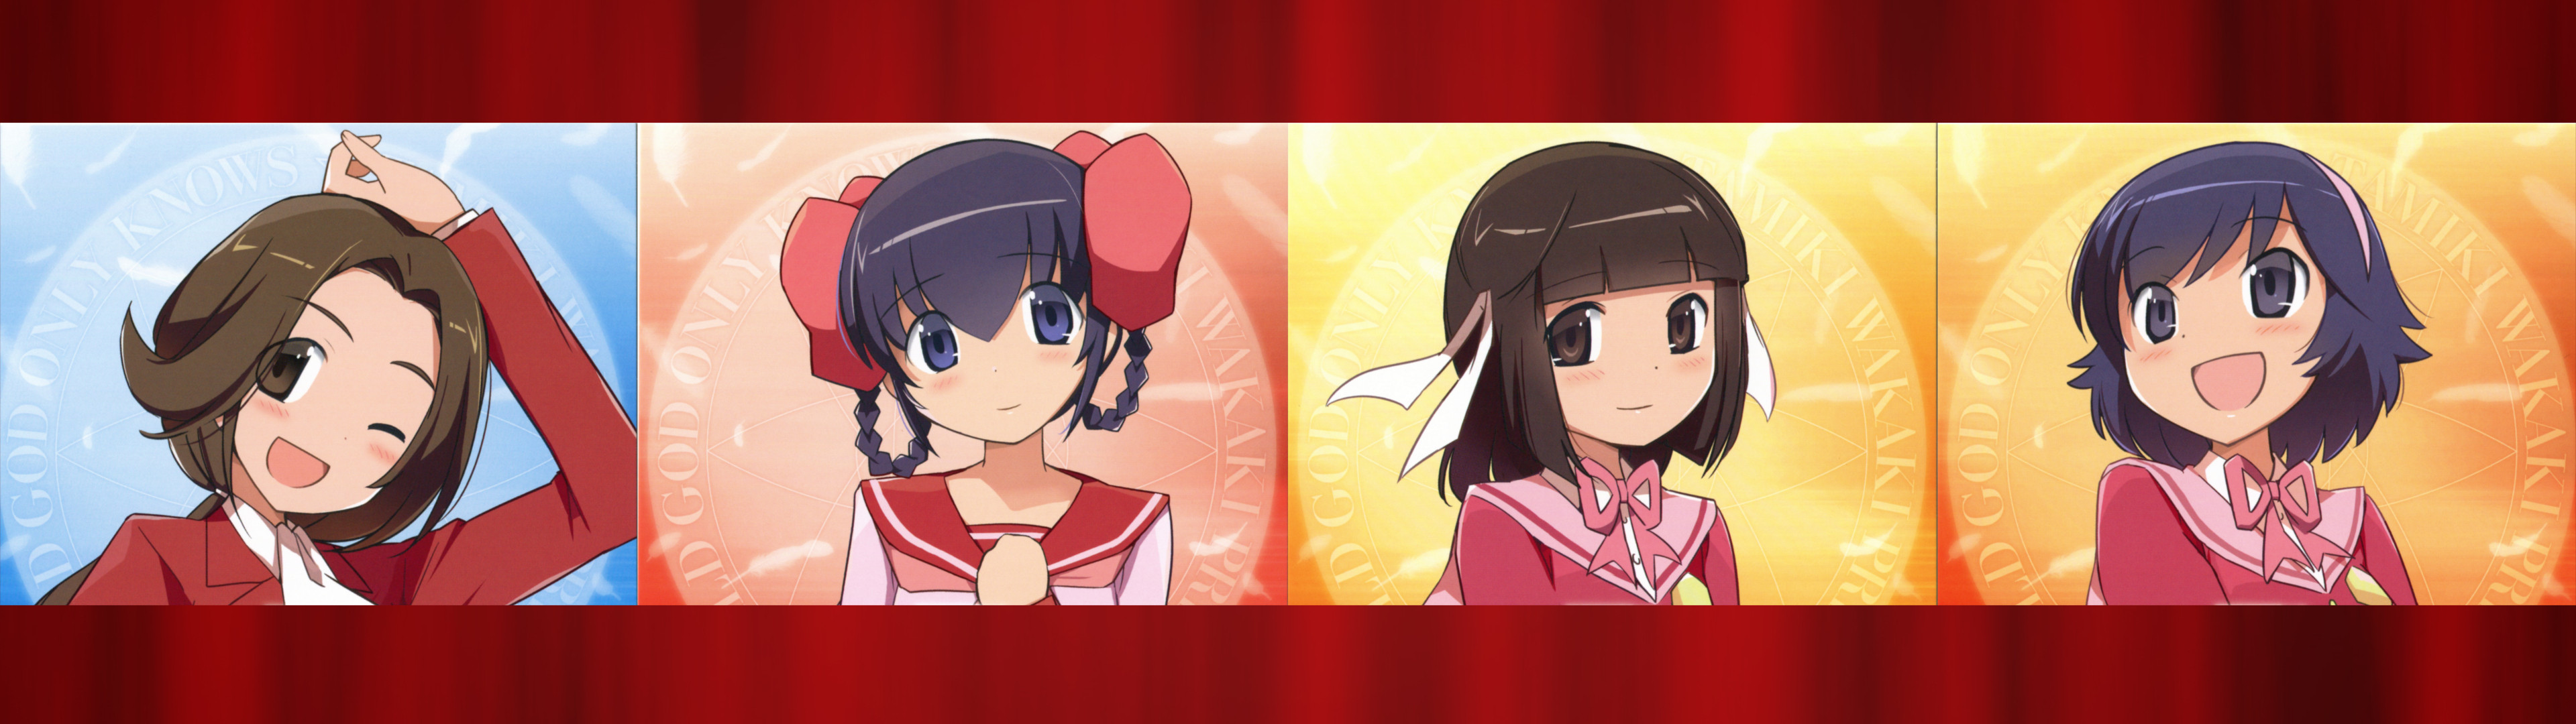 Anime The World God Only Knows 3840x1080